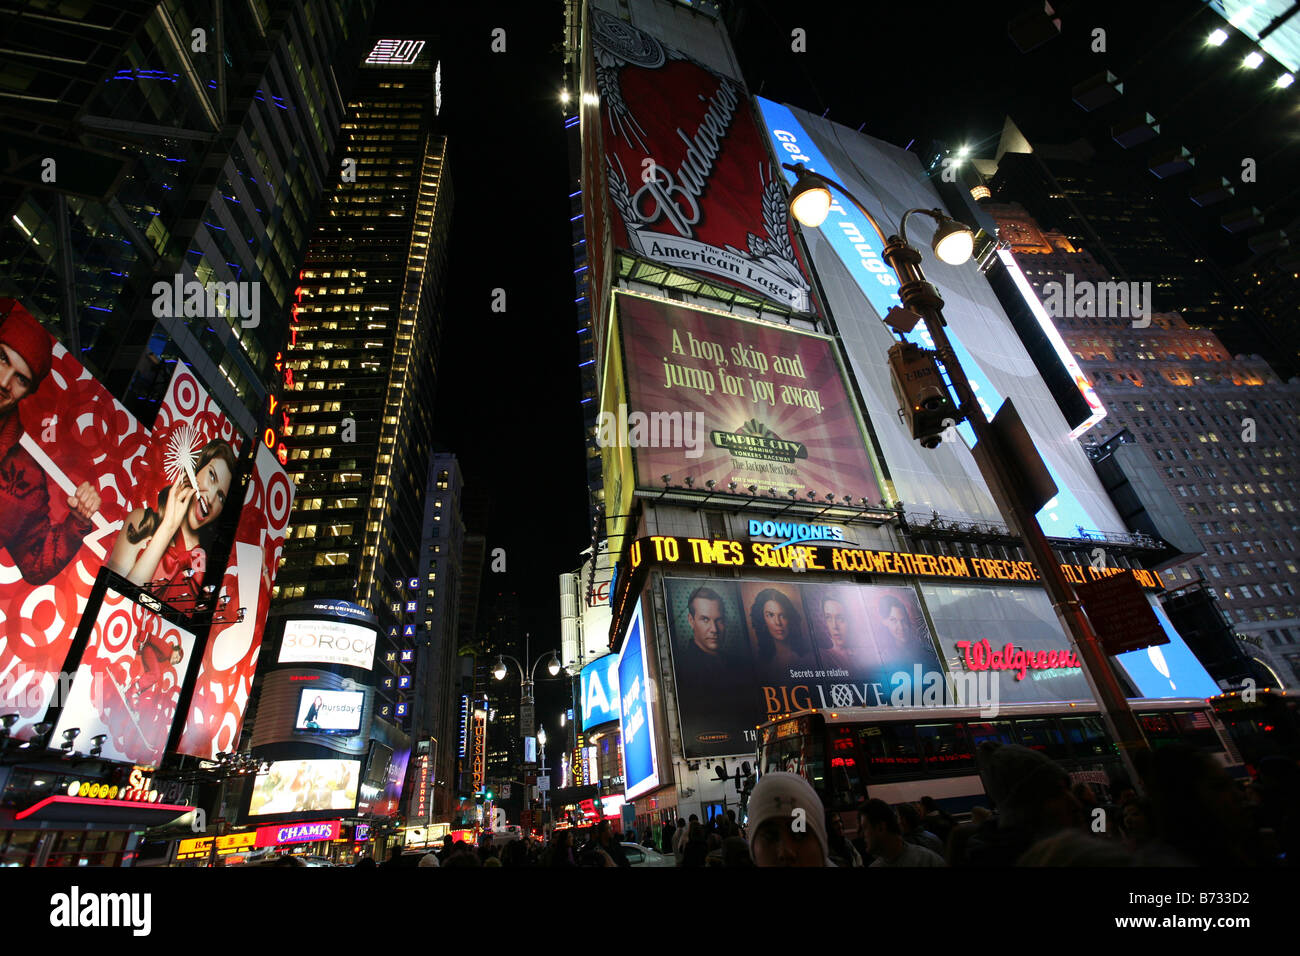 New York's Times Square at night Stock Photo